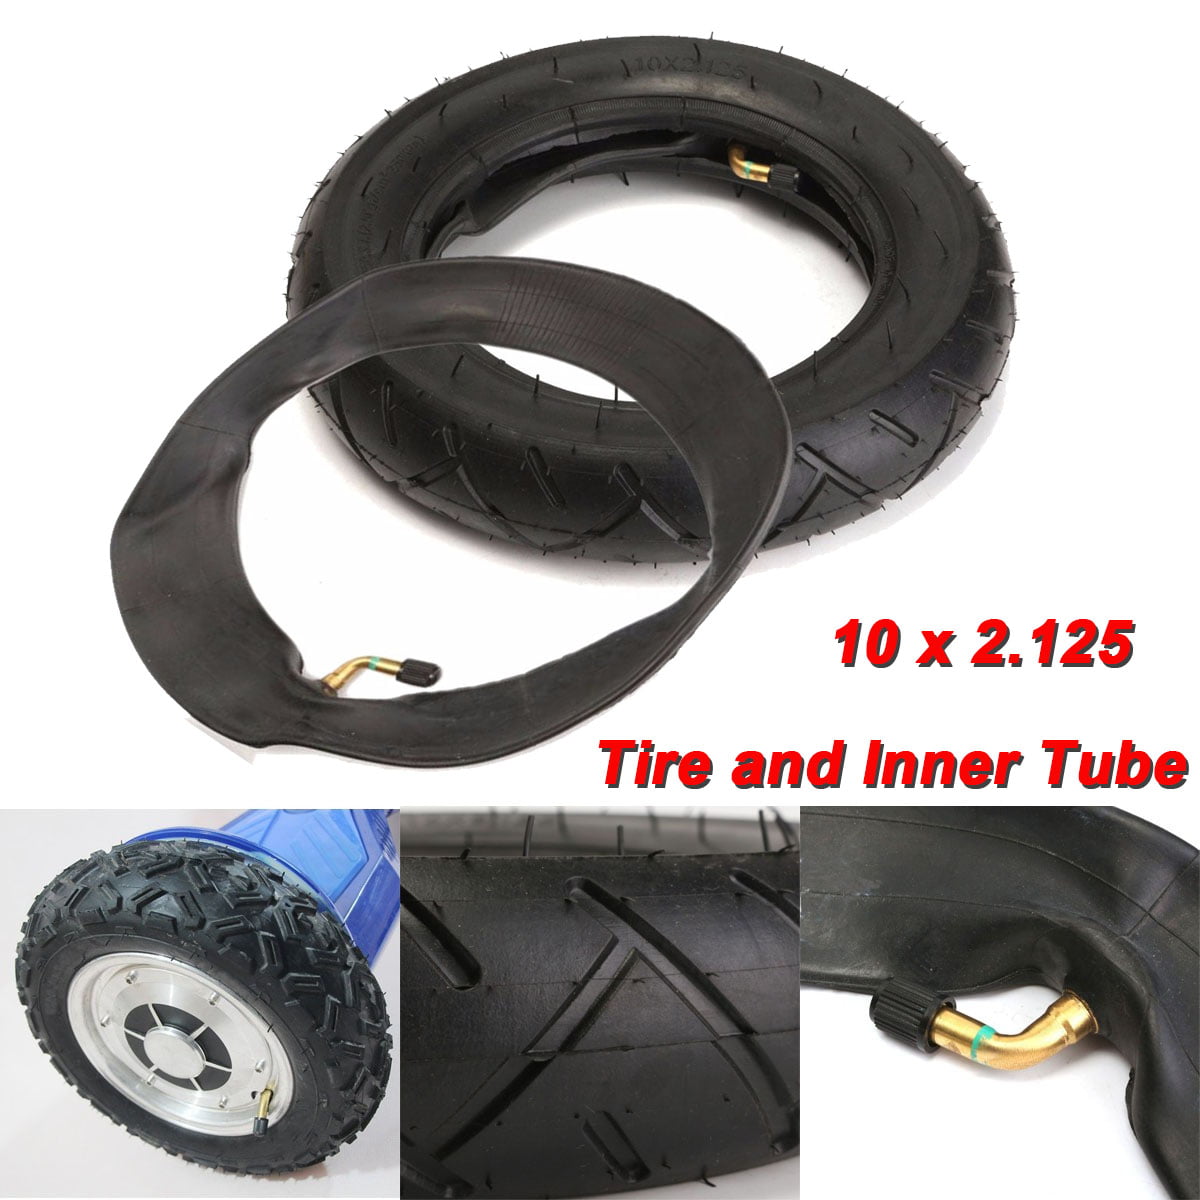 10" x 2.125" Tyre & Tire Inner Tube Rubber for Self Balancing Electric Scooter 